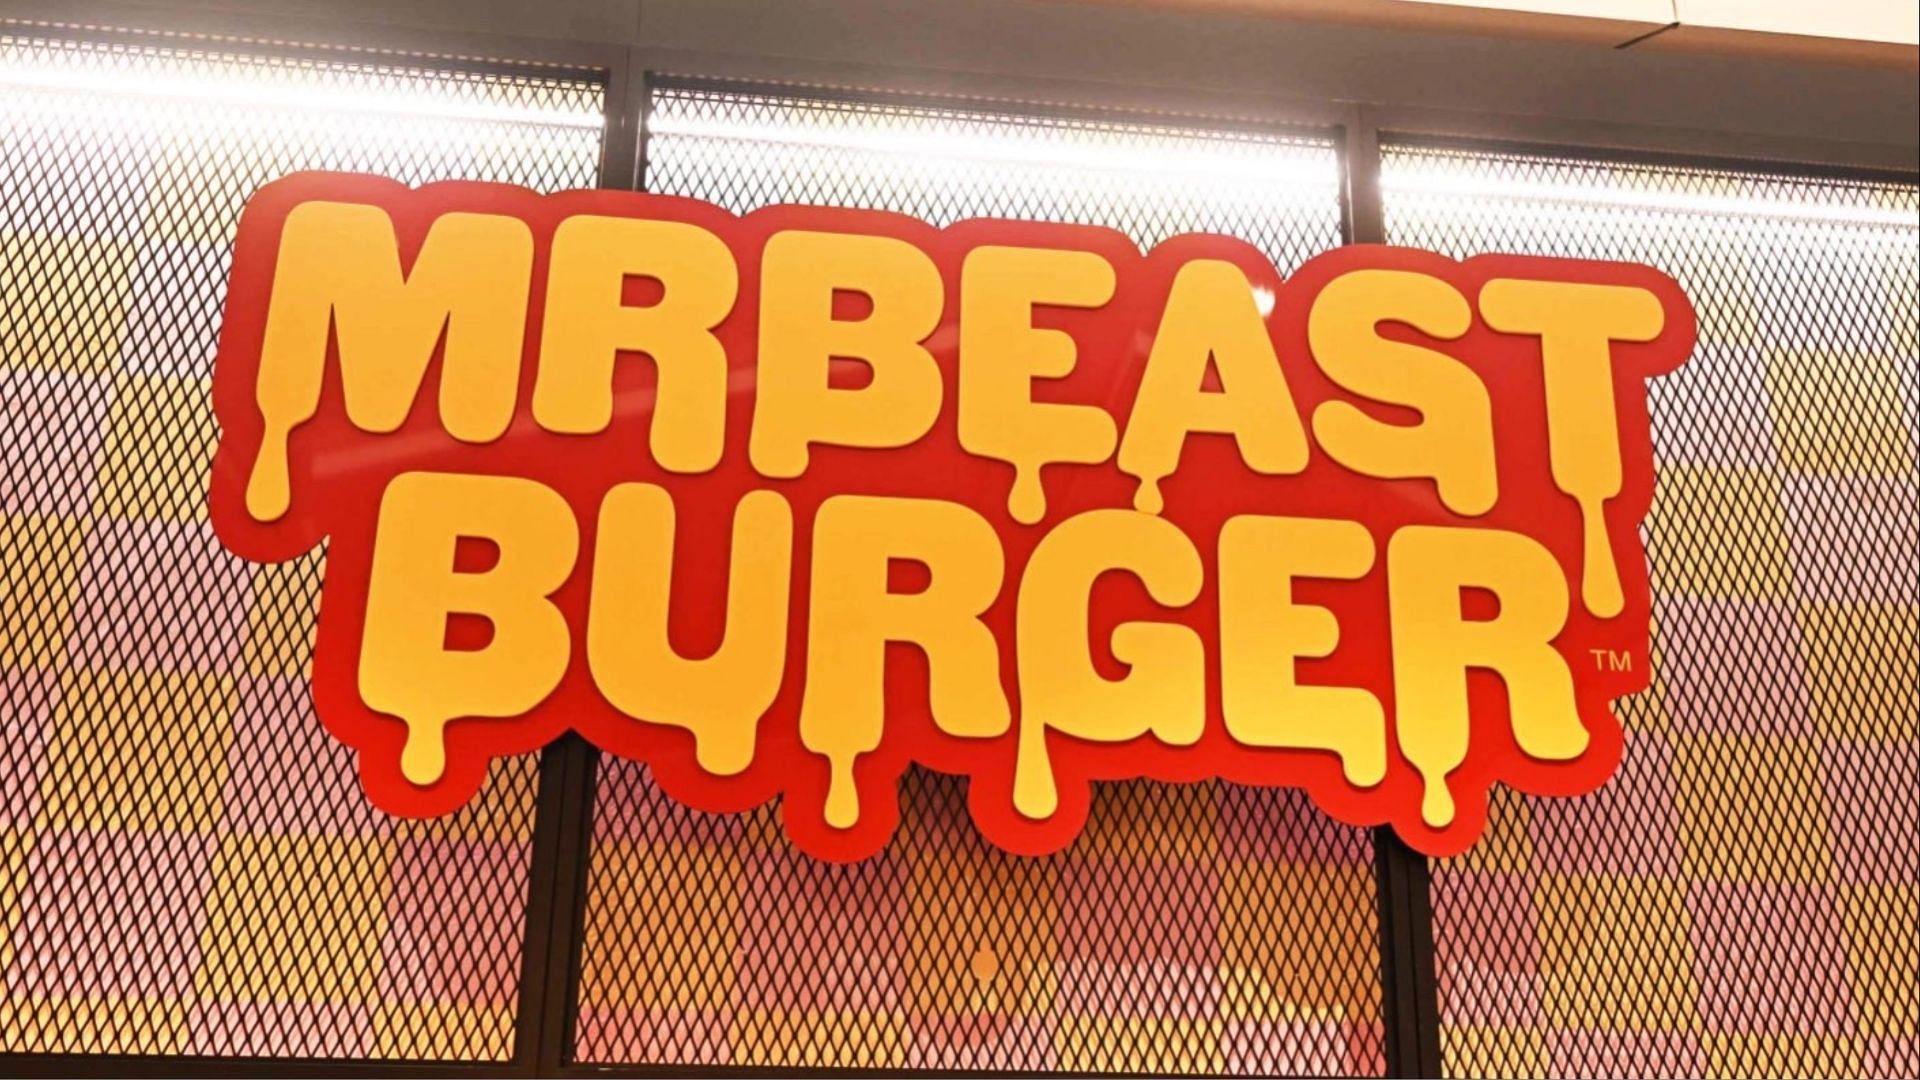 MrBeast Is Suing His Burger Supplier For Making 'Revolting' Food